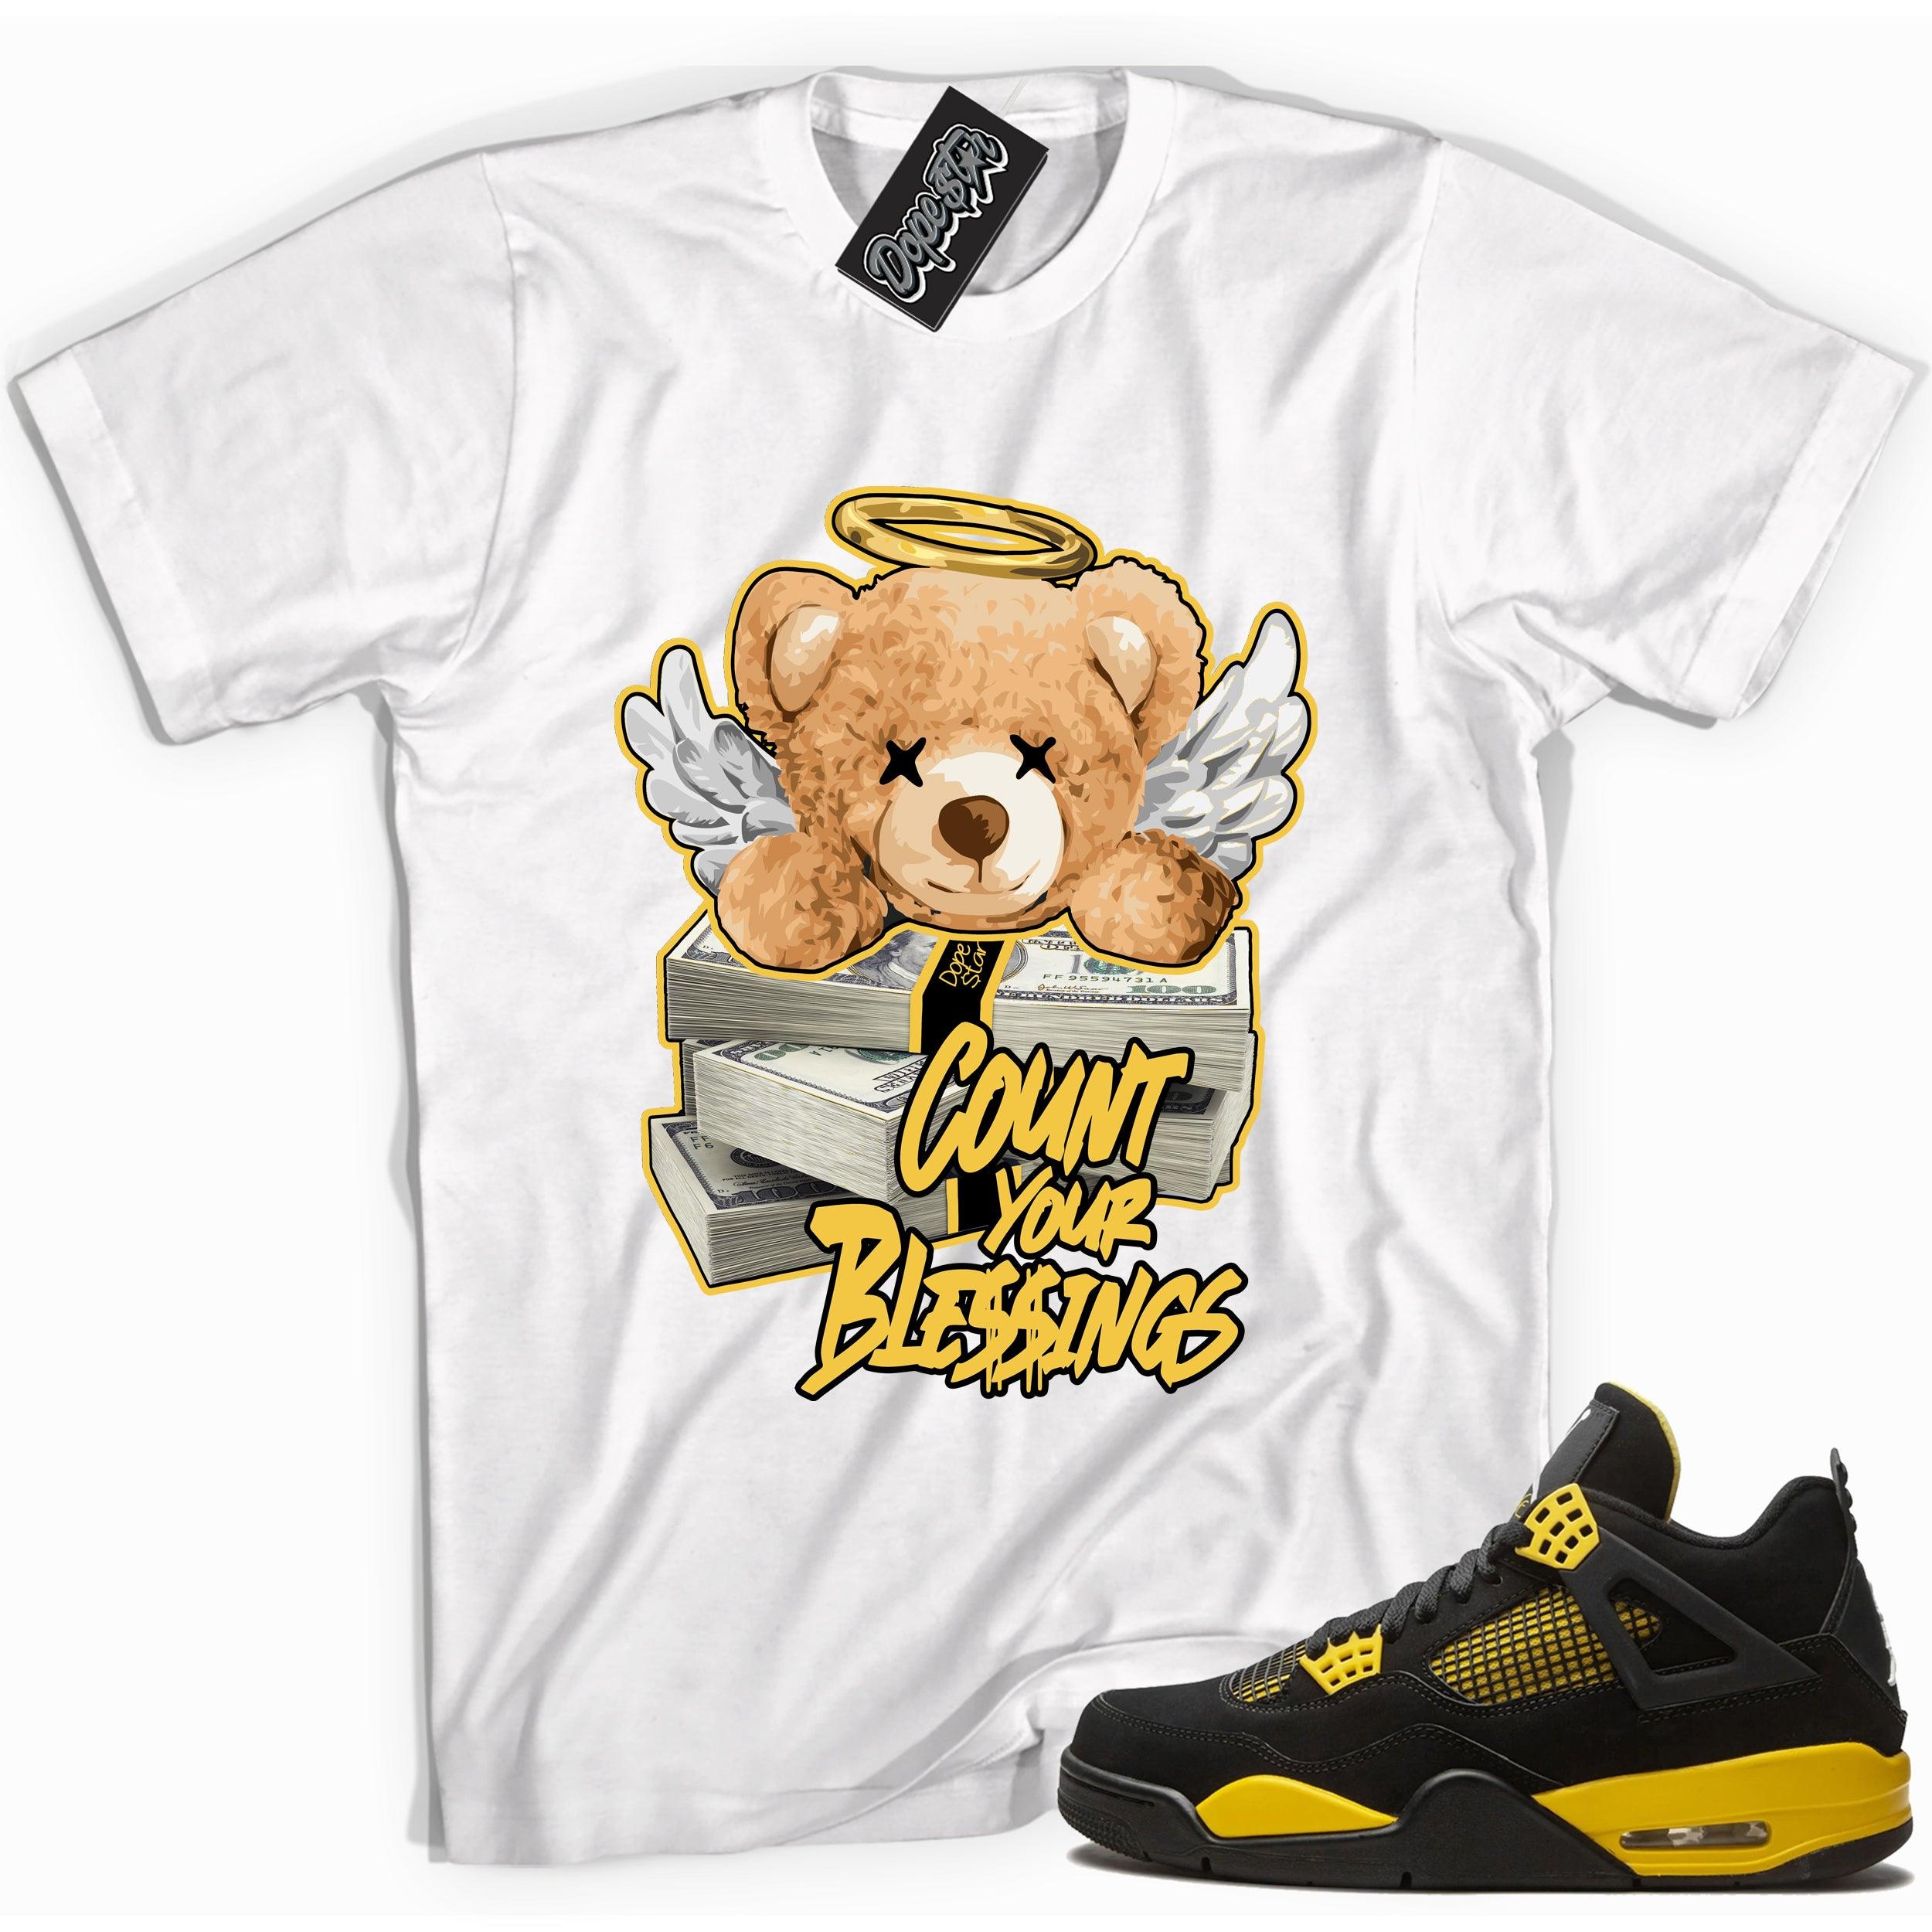 Cool white graphic tee with 'count your blessings' print, that perfectly matches Air Jordan 4 Thunder sneakers